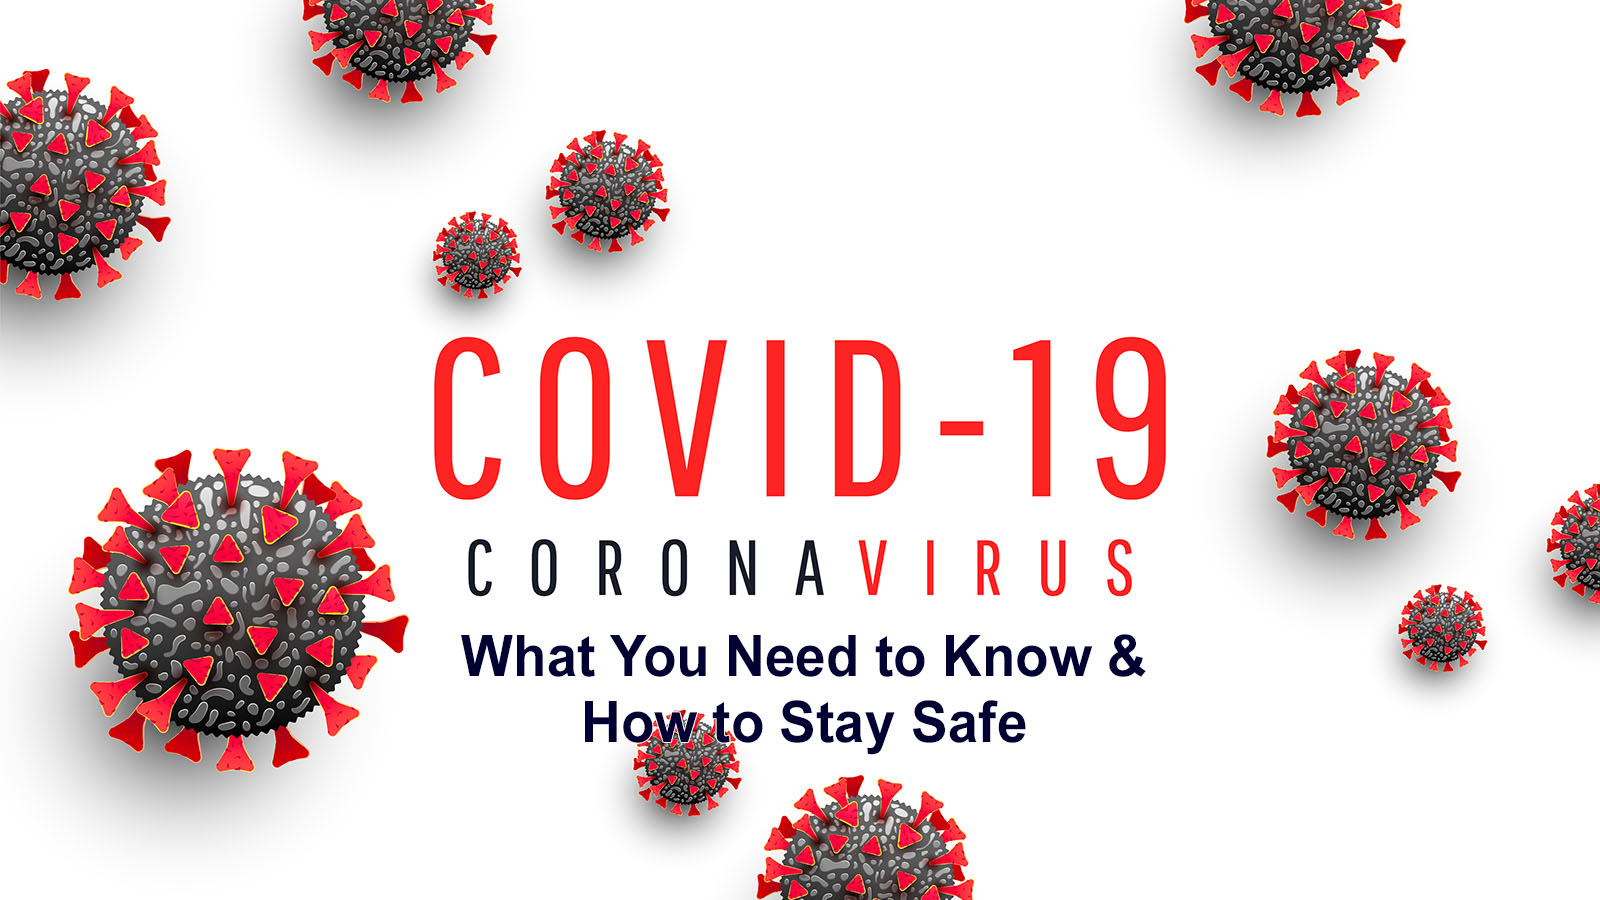 image of 3-d coronavirus with the words: COVID-19 Coronavirus - What You Need to Know and How to Stay Safe